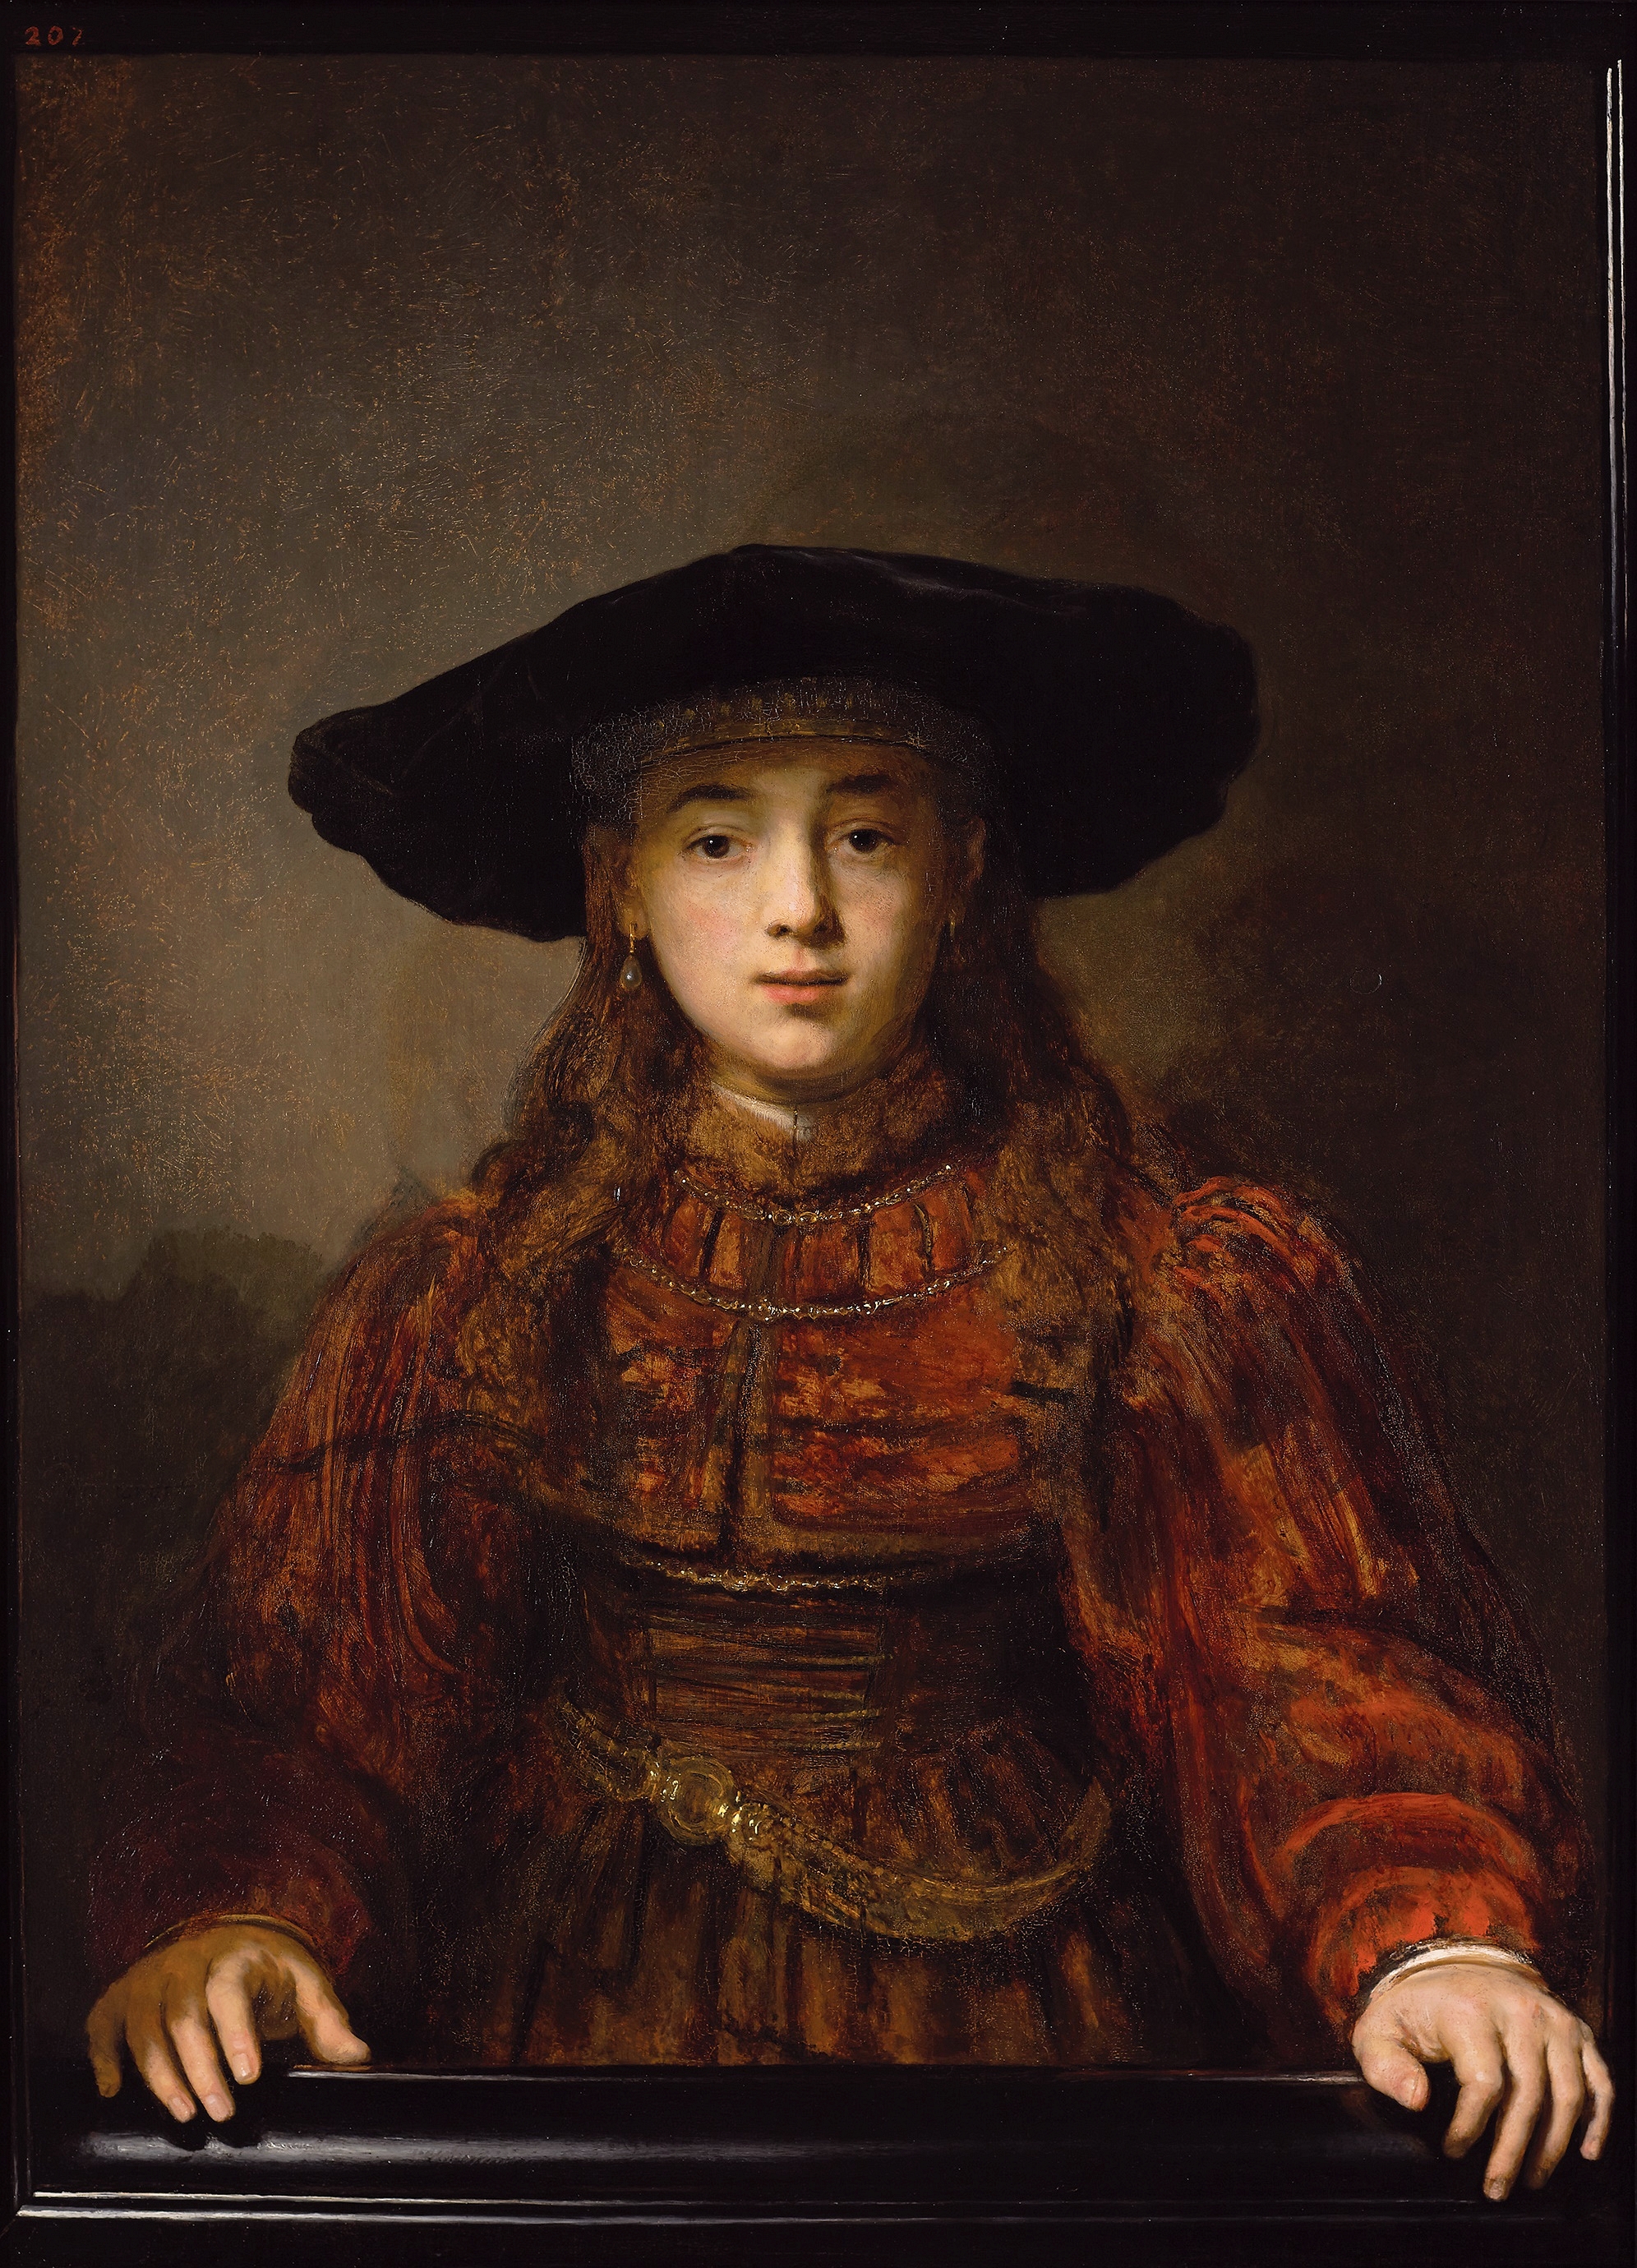 The Girl in a Picture Frame by Rembrandt van Rijn - 1641 - 105,5 x 76,3 cm The Royal Castle in Warsaw